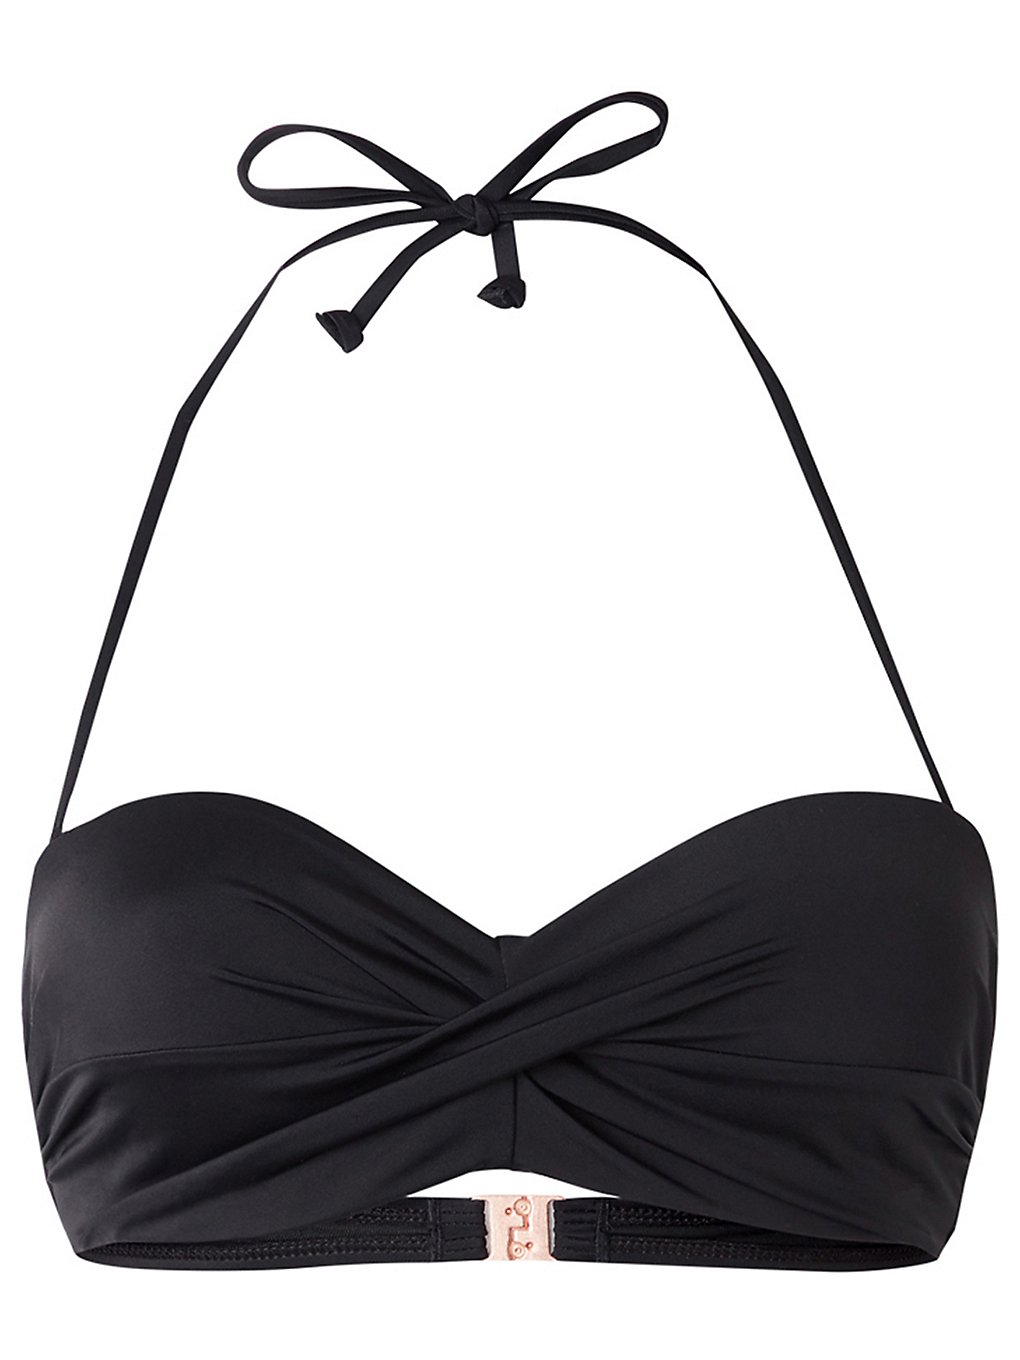 O'Neill Sol Mix C Cup Bikini Top black out  - Onlineshop Blue Tomato